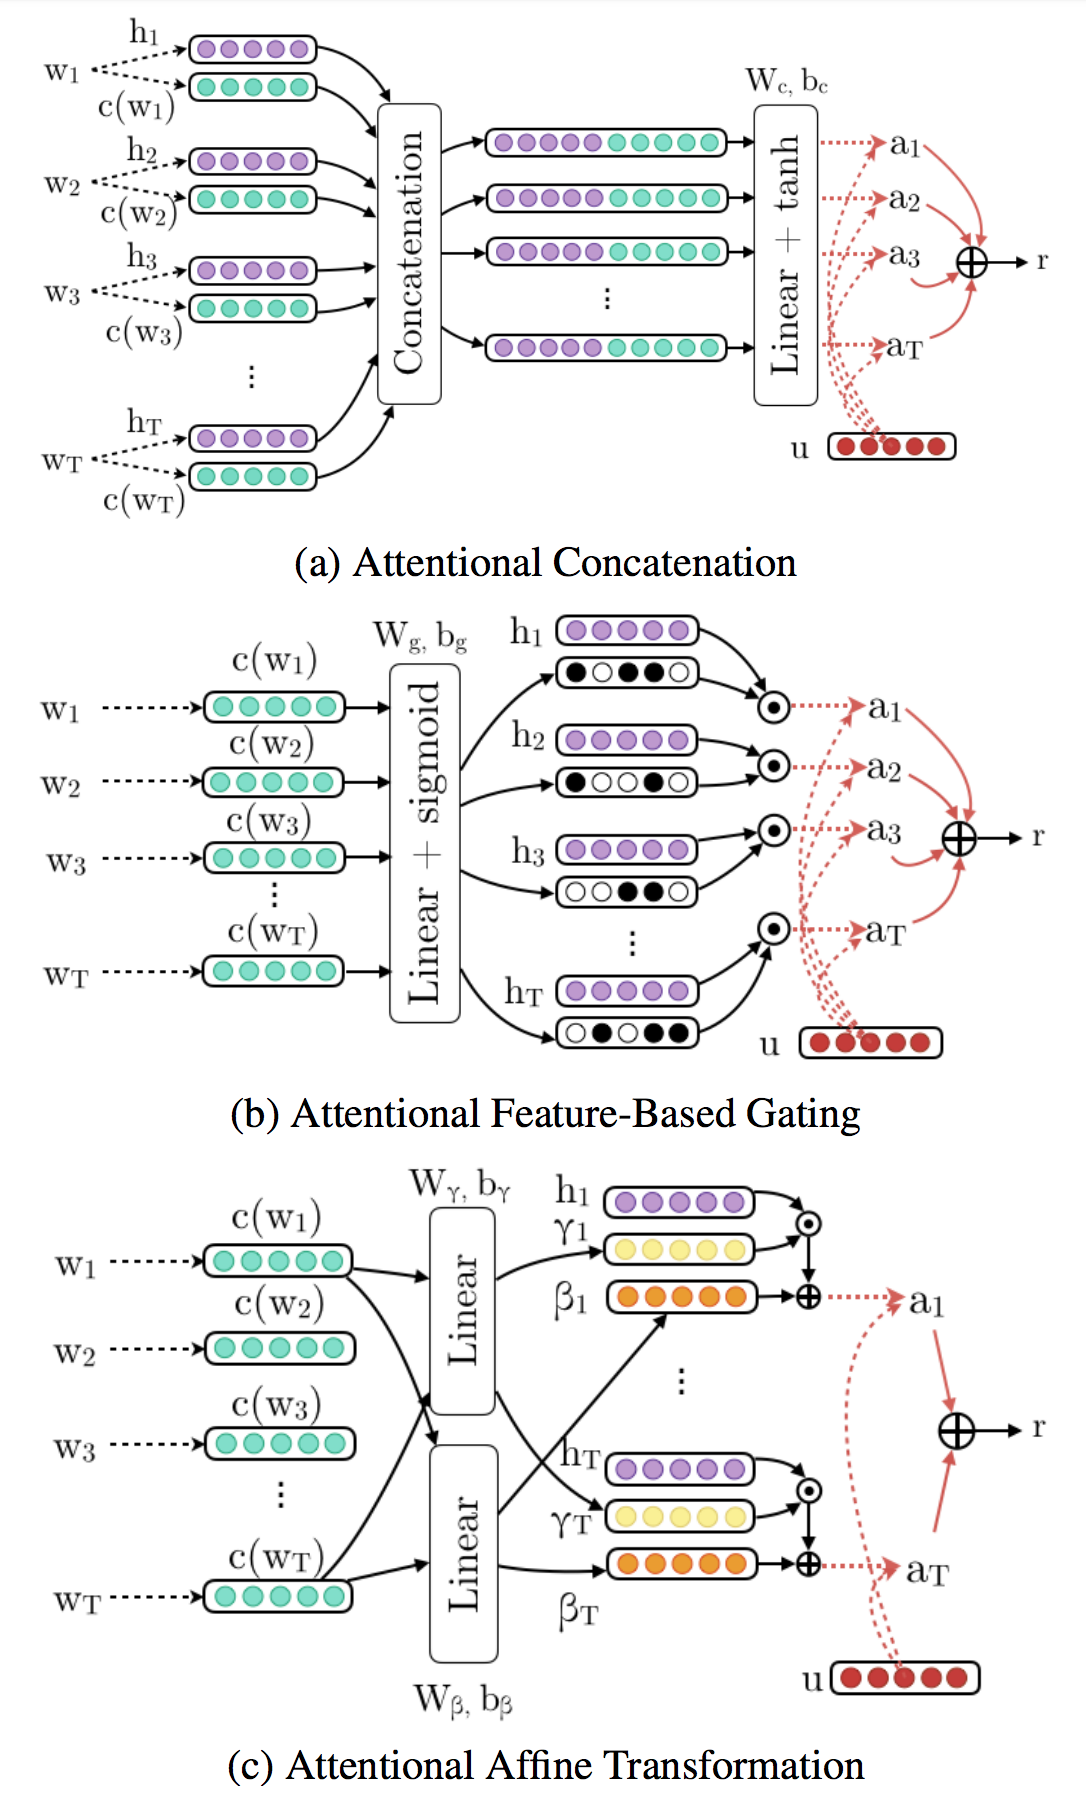 How to Incorporate External Knowledge in Recurrent Neural Networks (RNNs) for Text Classification